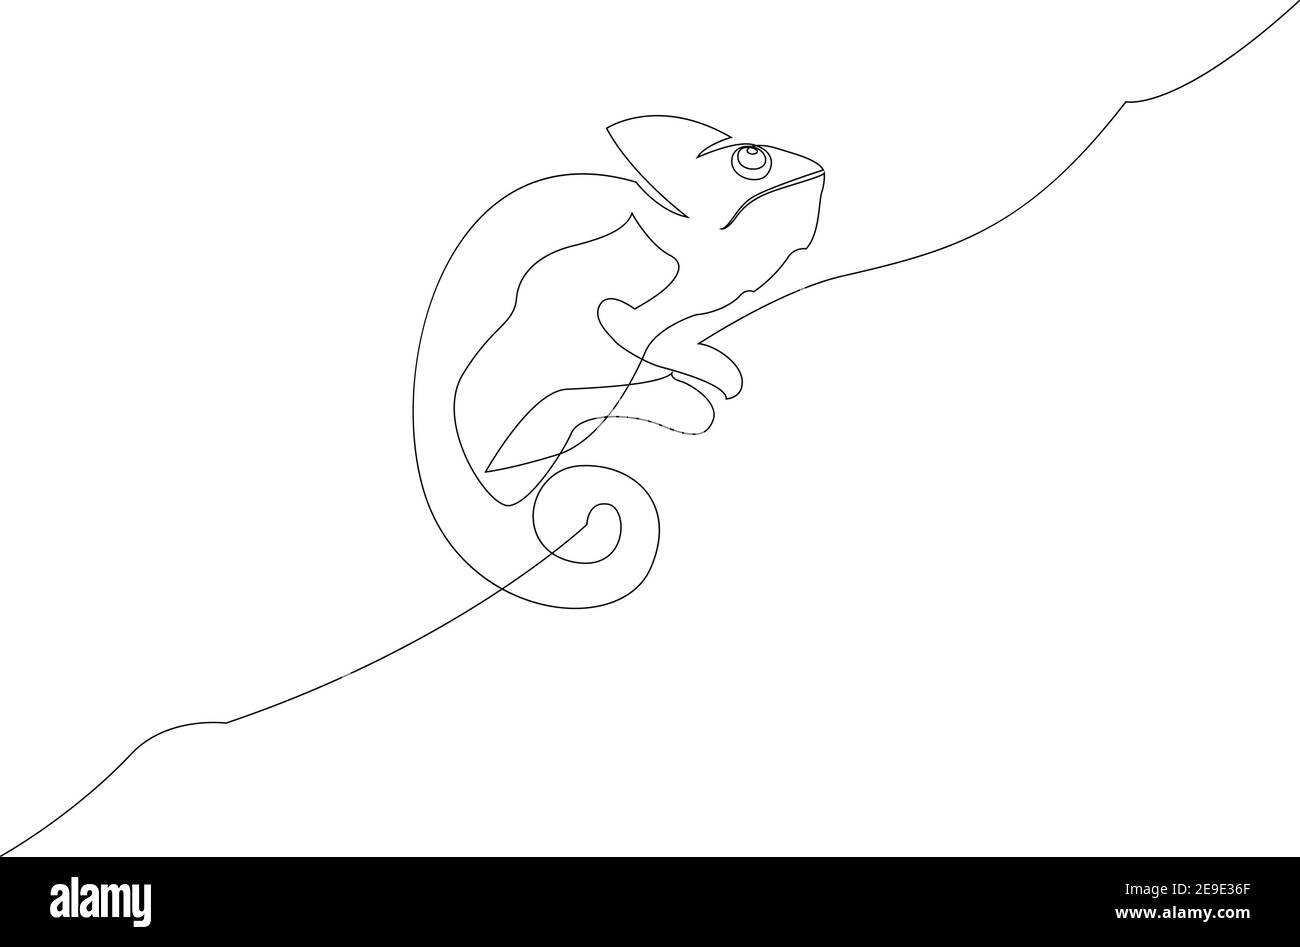 One line drawing of chameleon. Continuous line illustration on white background Stock Vector